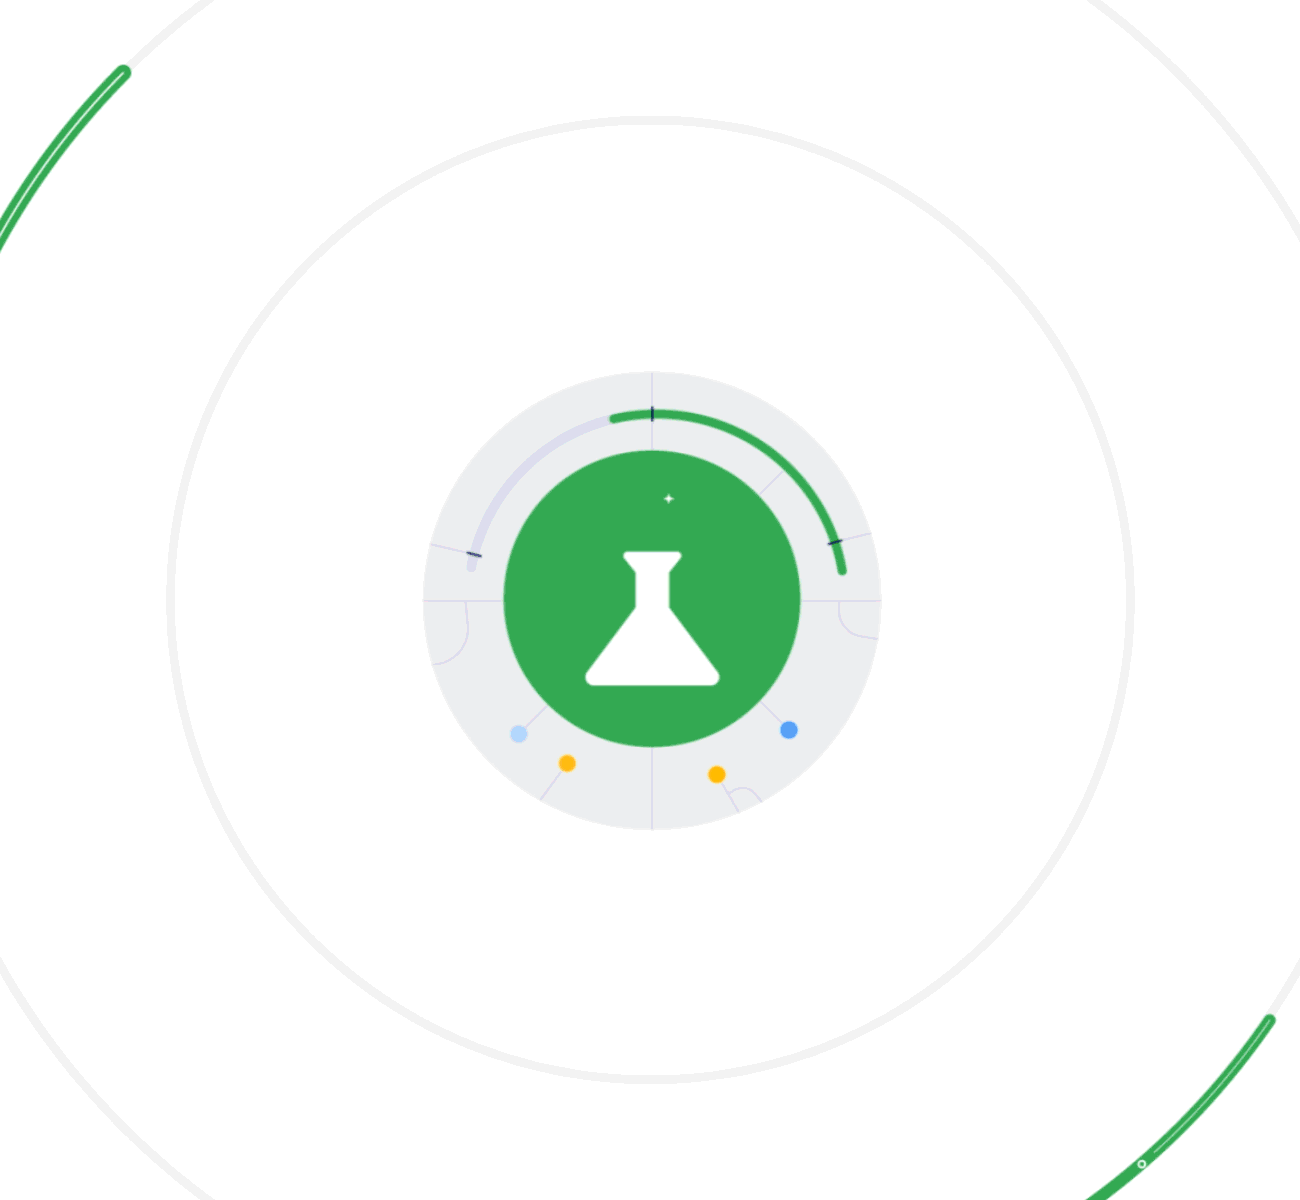 Animation of the Google channel icons orbiting a flask icon in the center